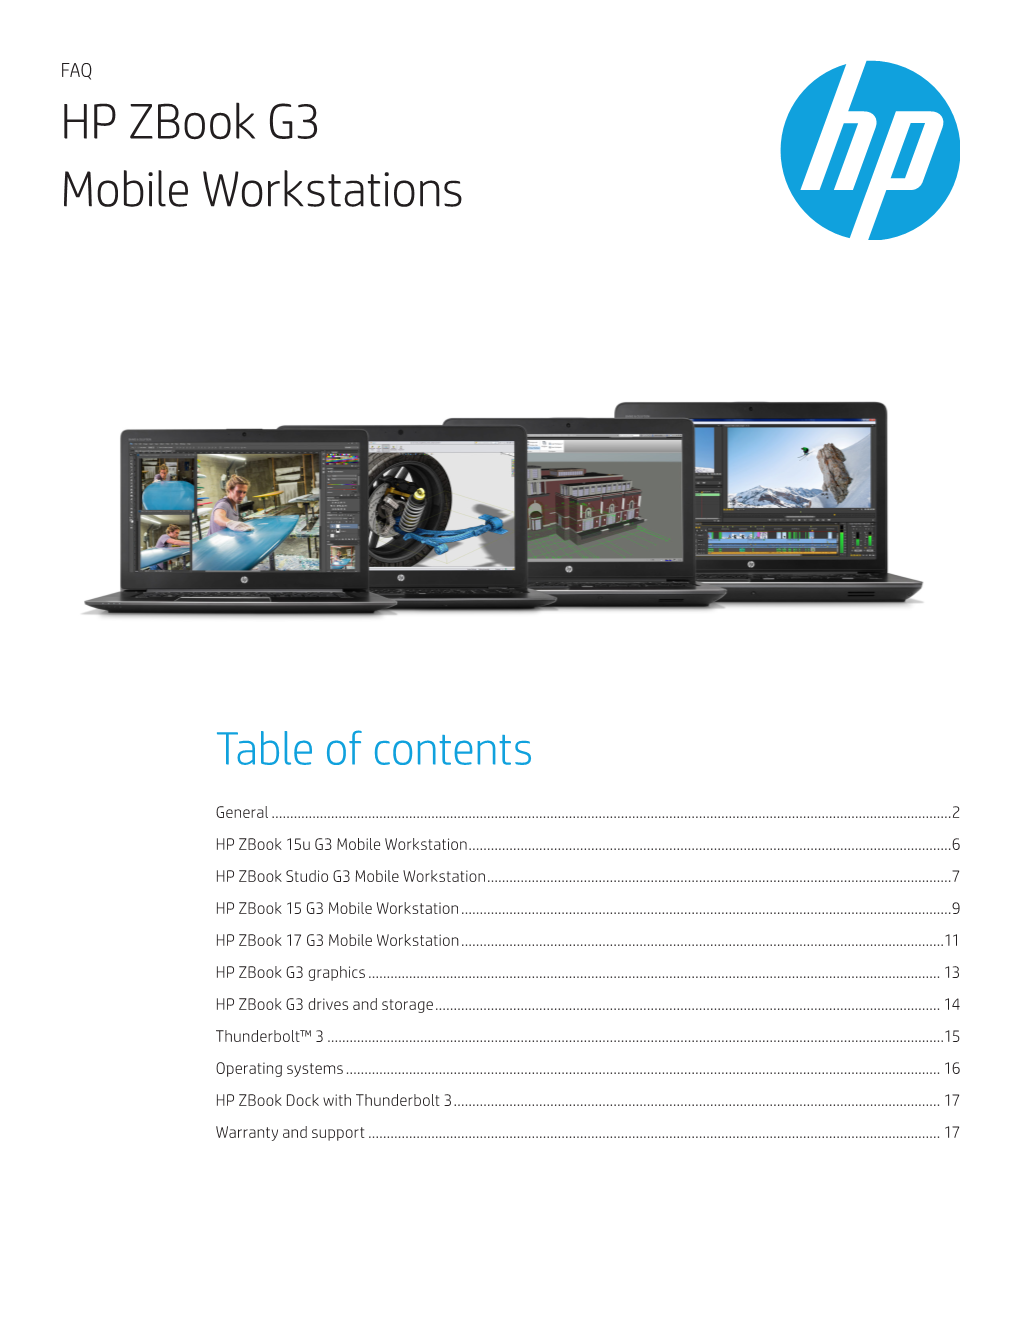 HP Zbook G3 Mobile Workstations